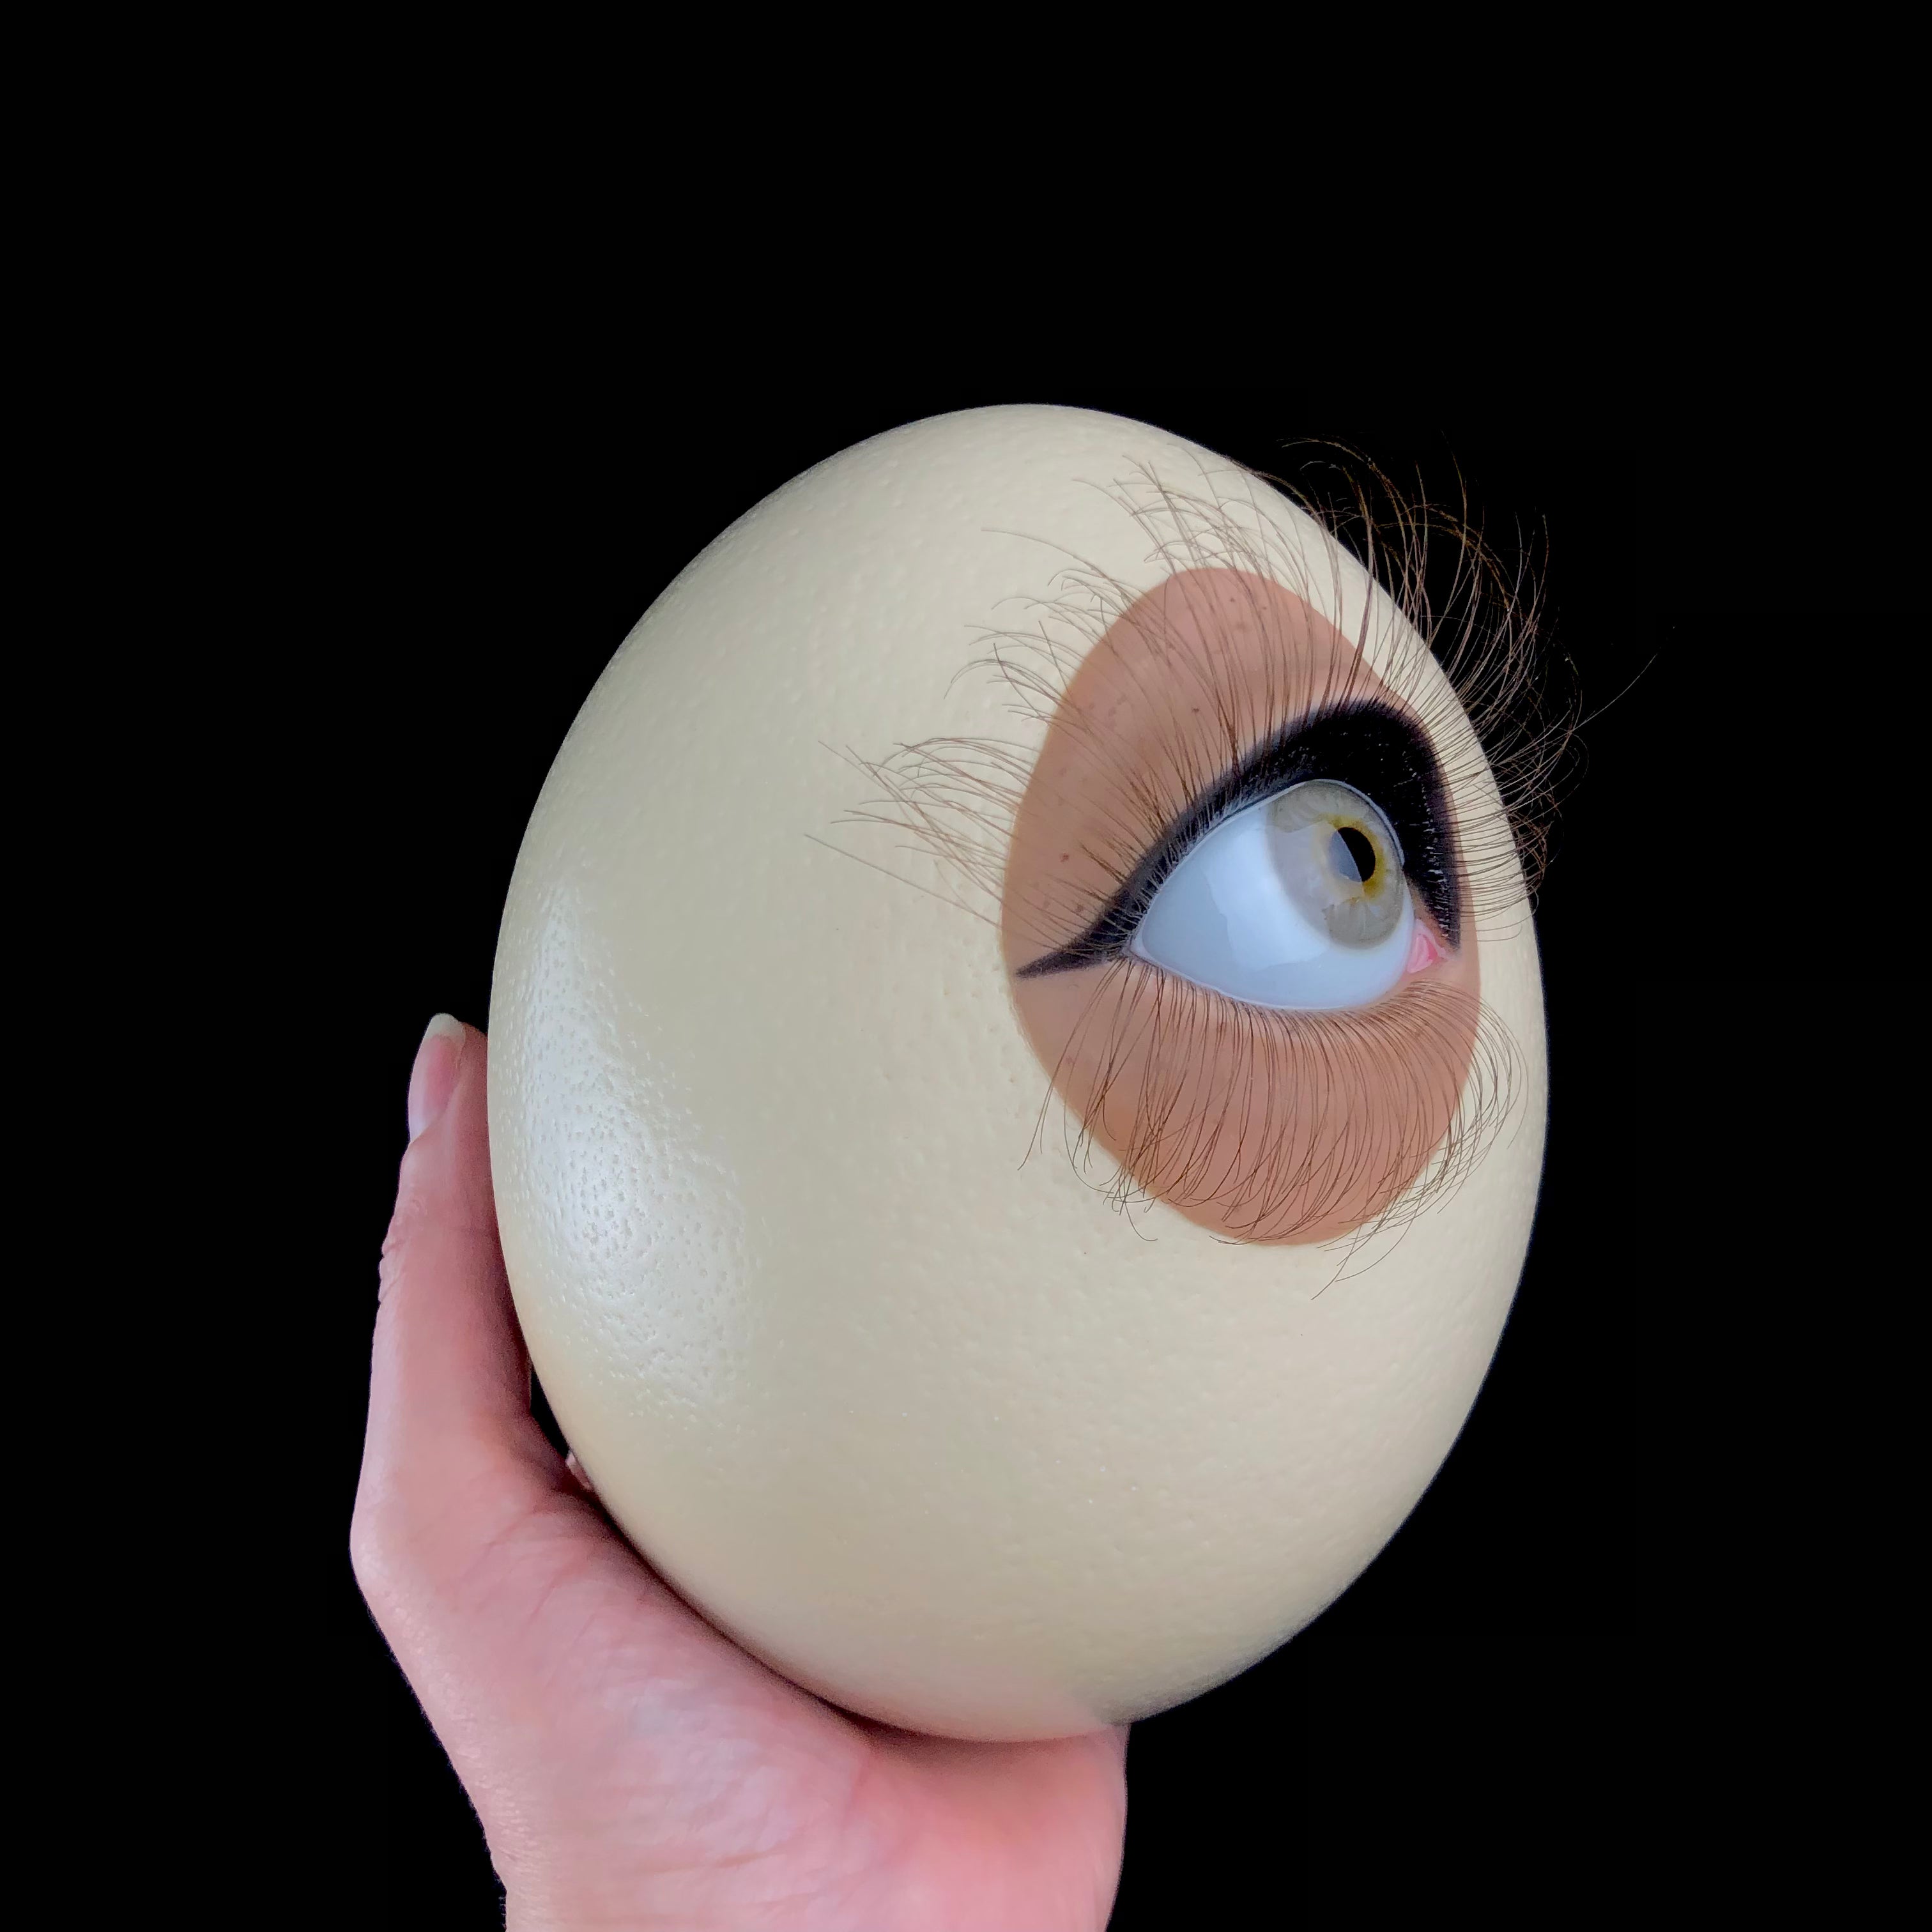 Side view of Olly the Ostrich Egg shown in hand